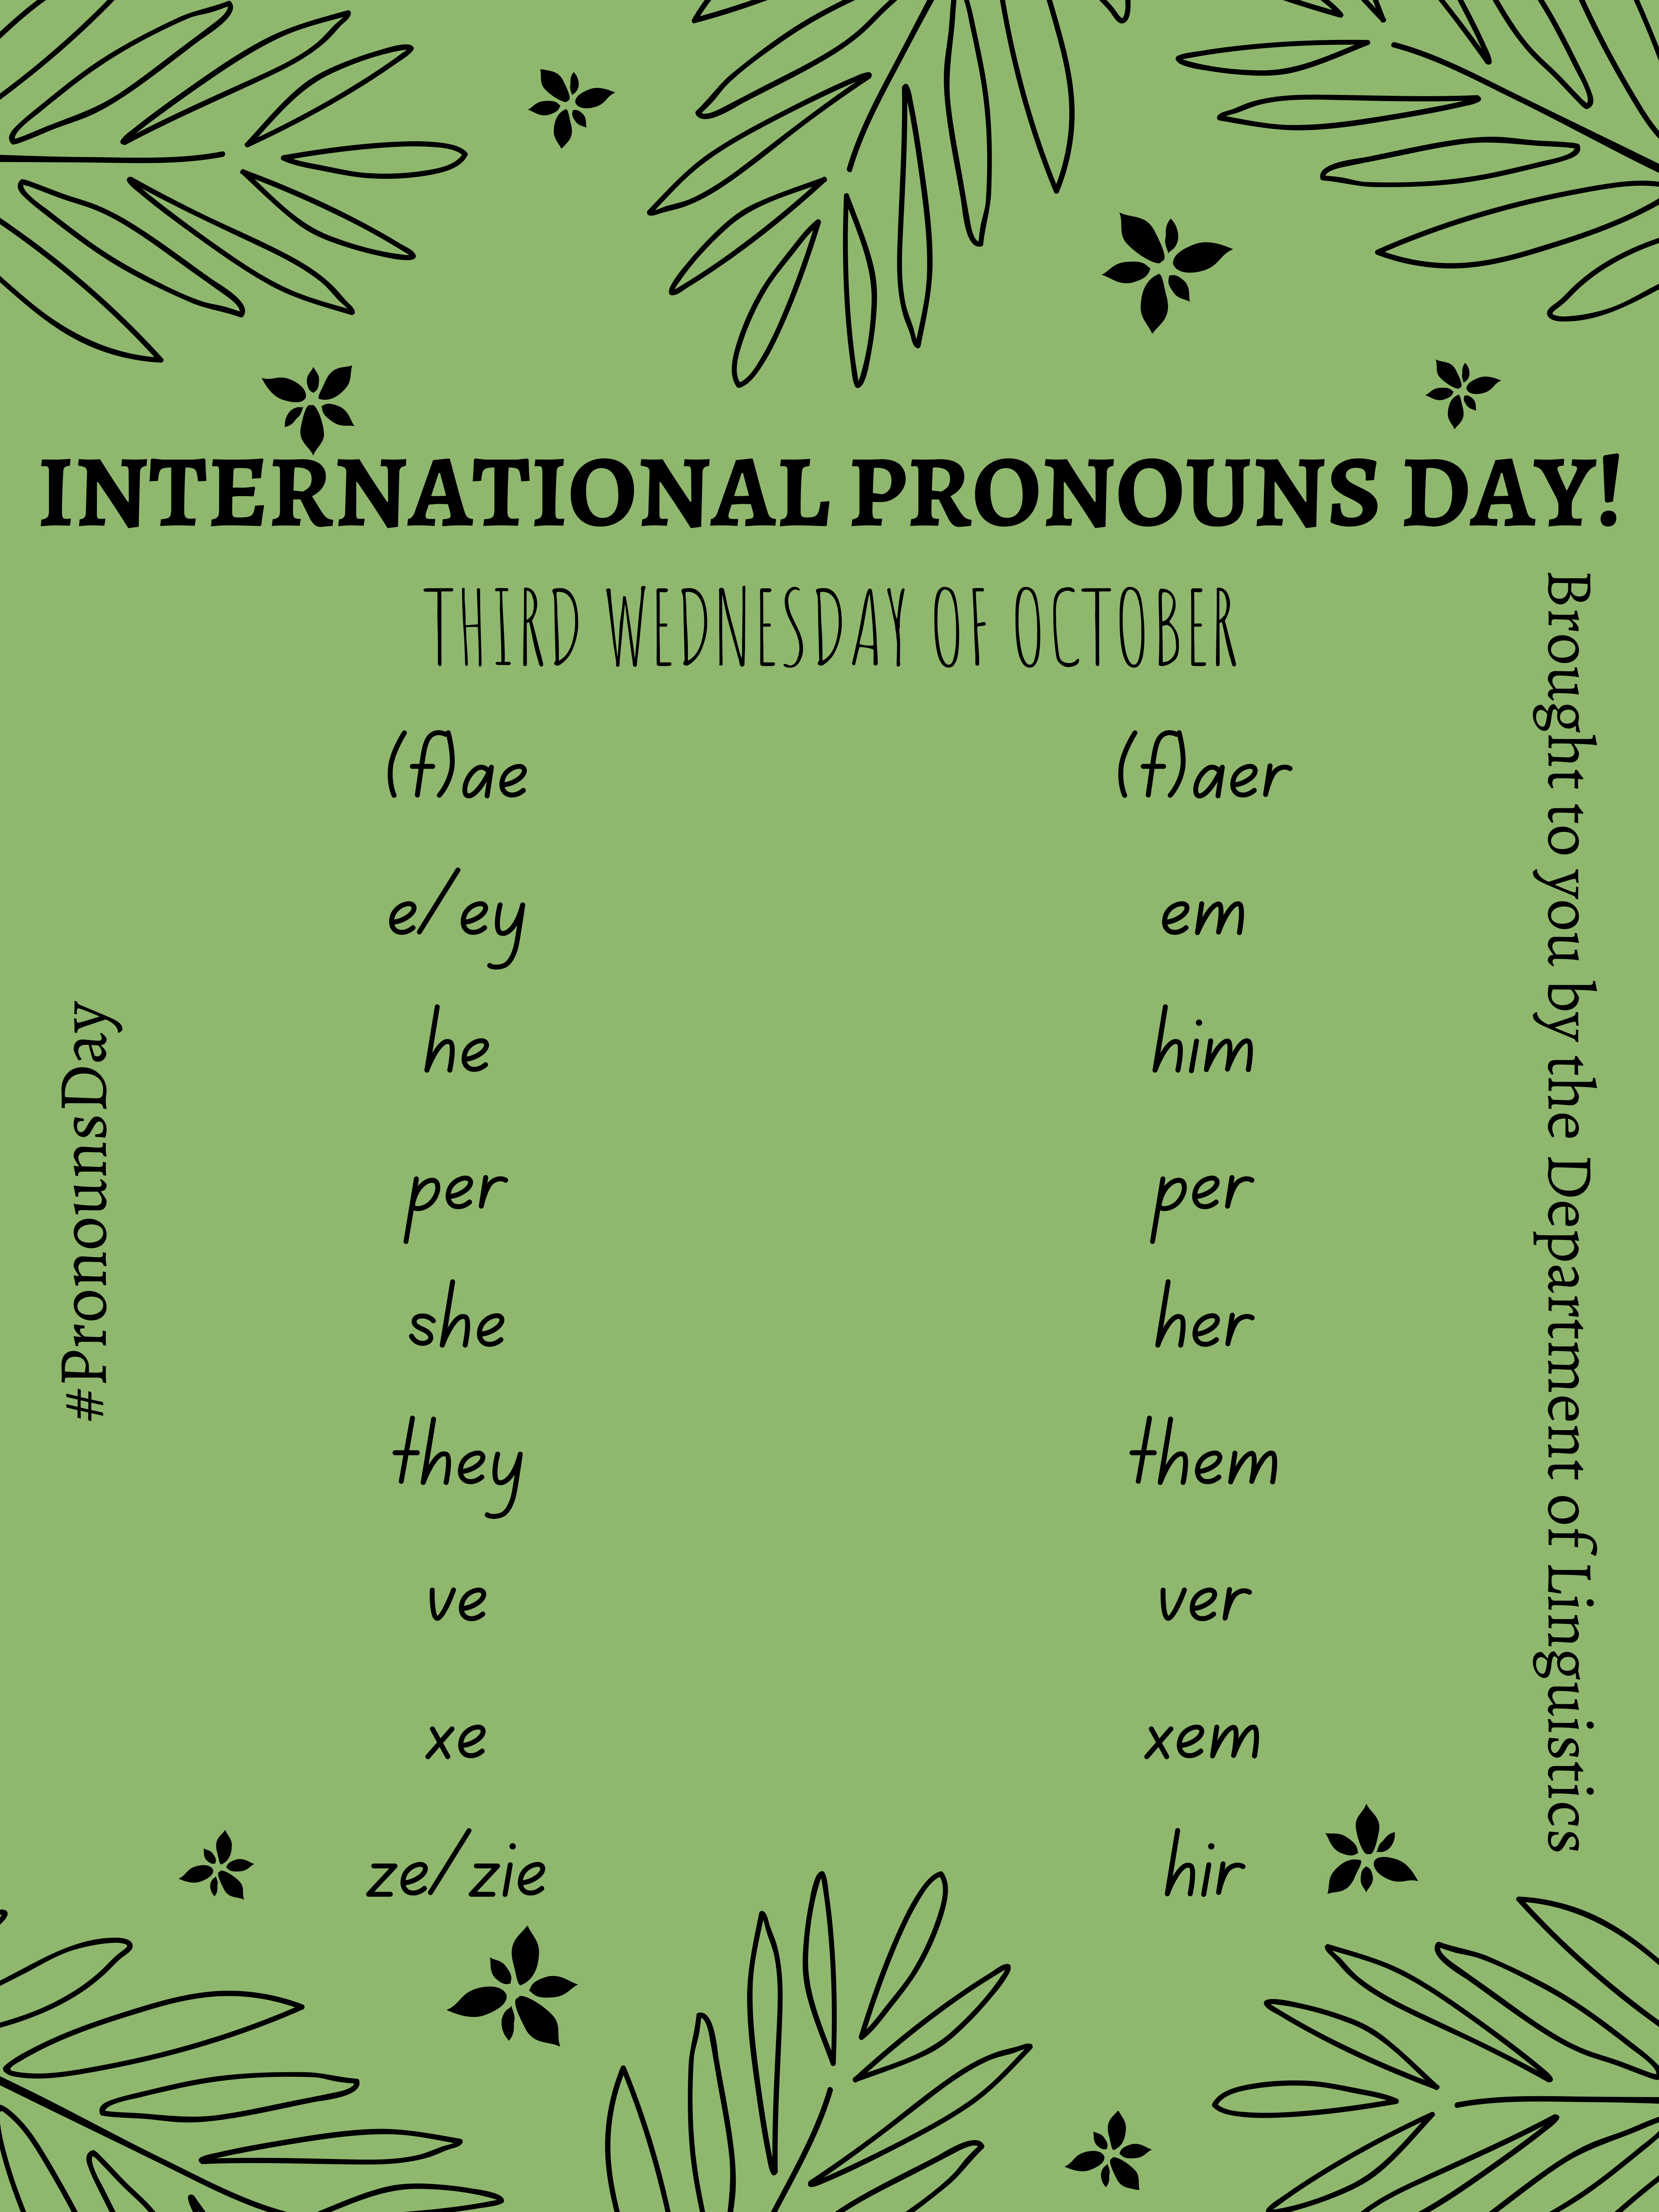 Linguistics Poster. International Pronouns Day is the 3rd Wednesday of October. See webpage for full description.